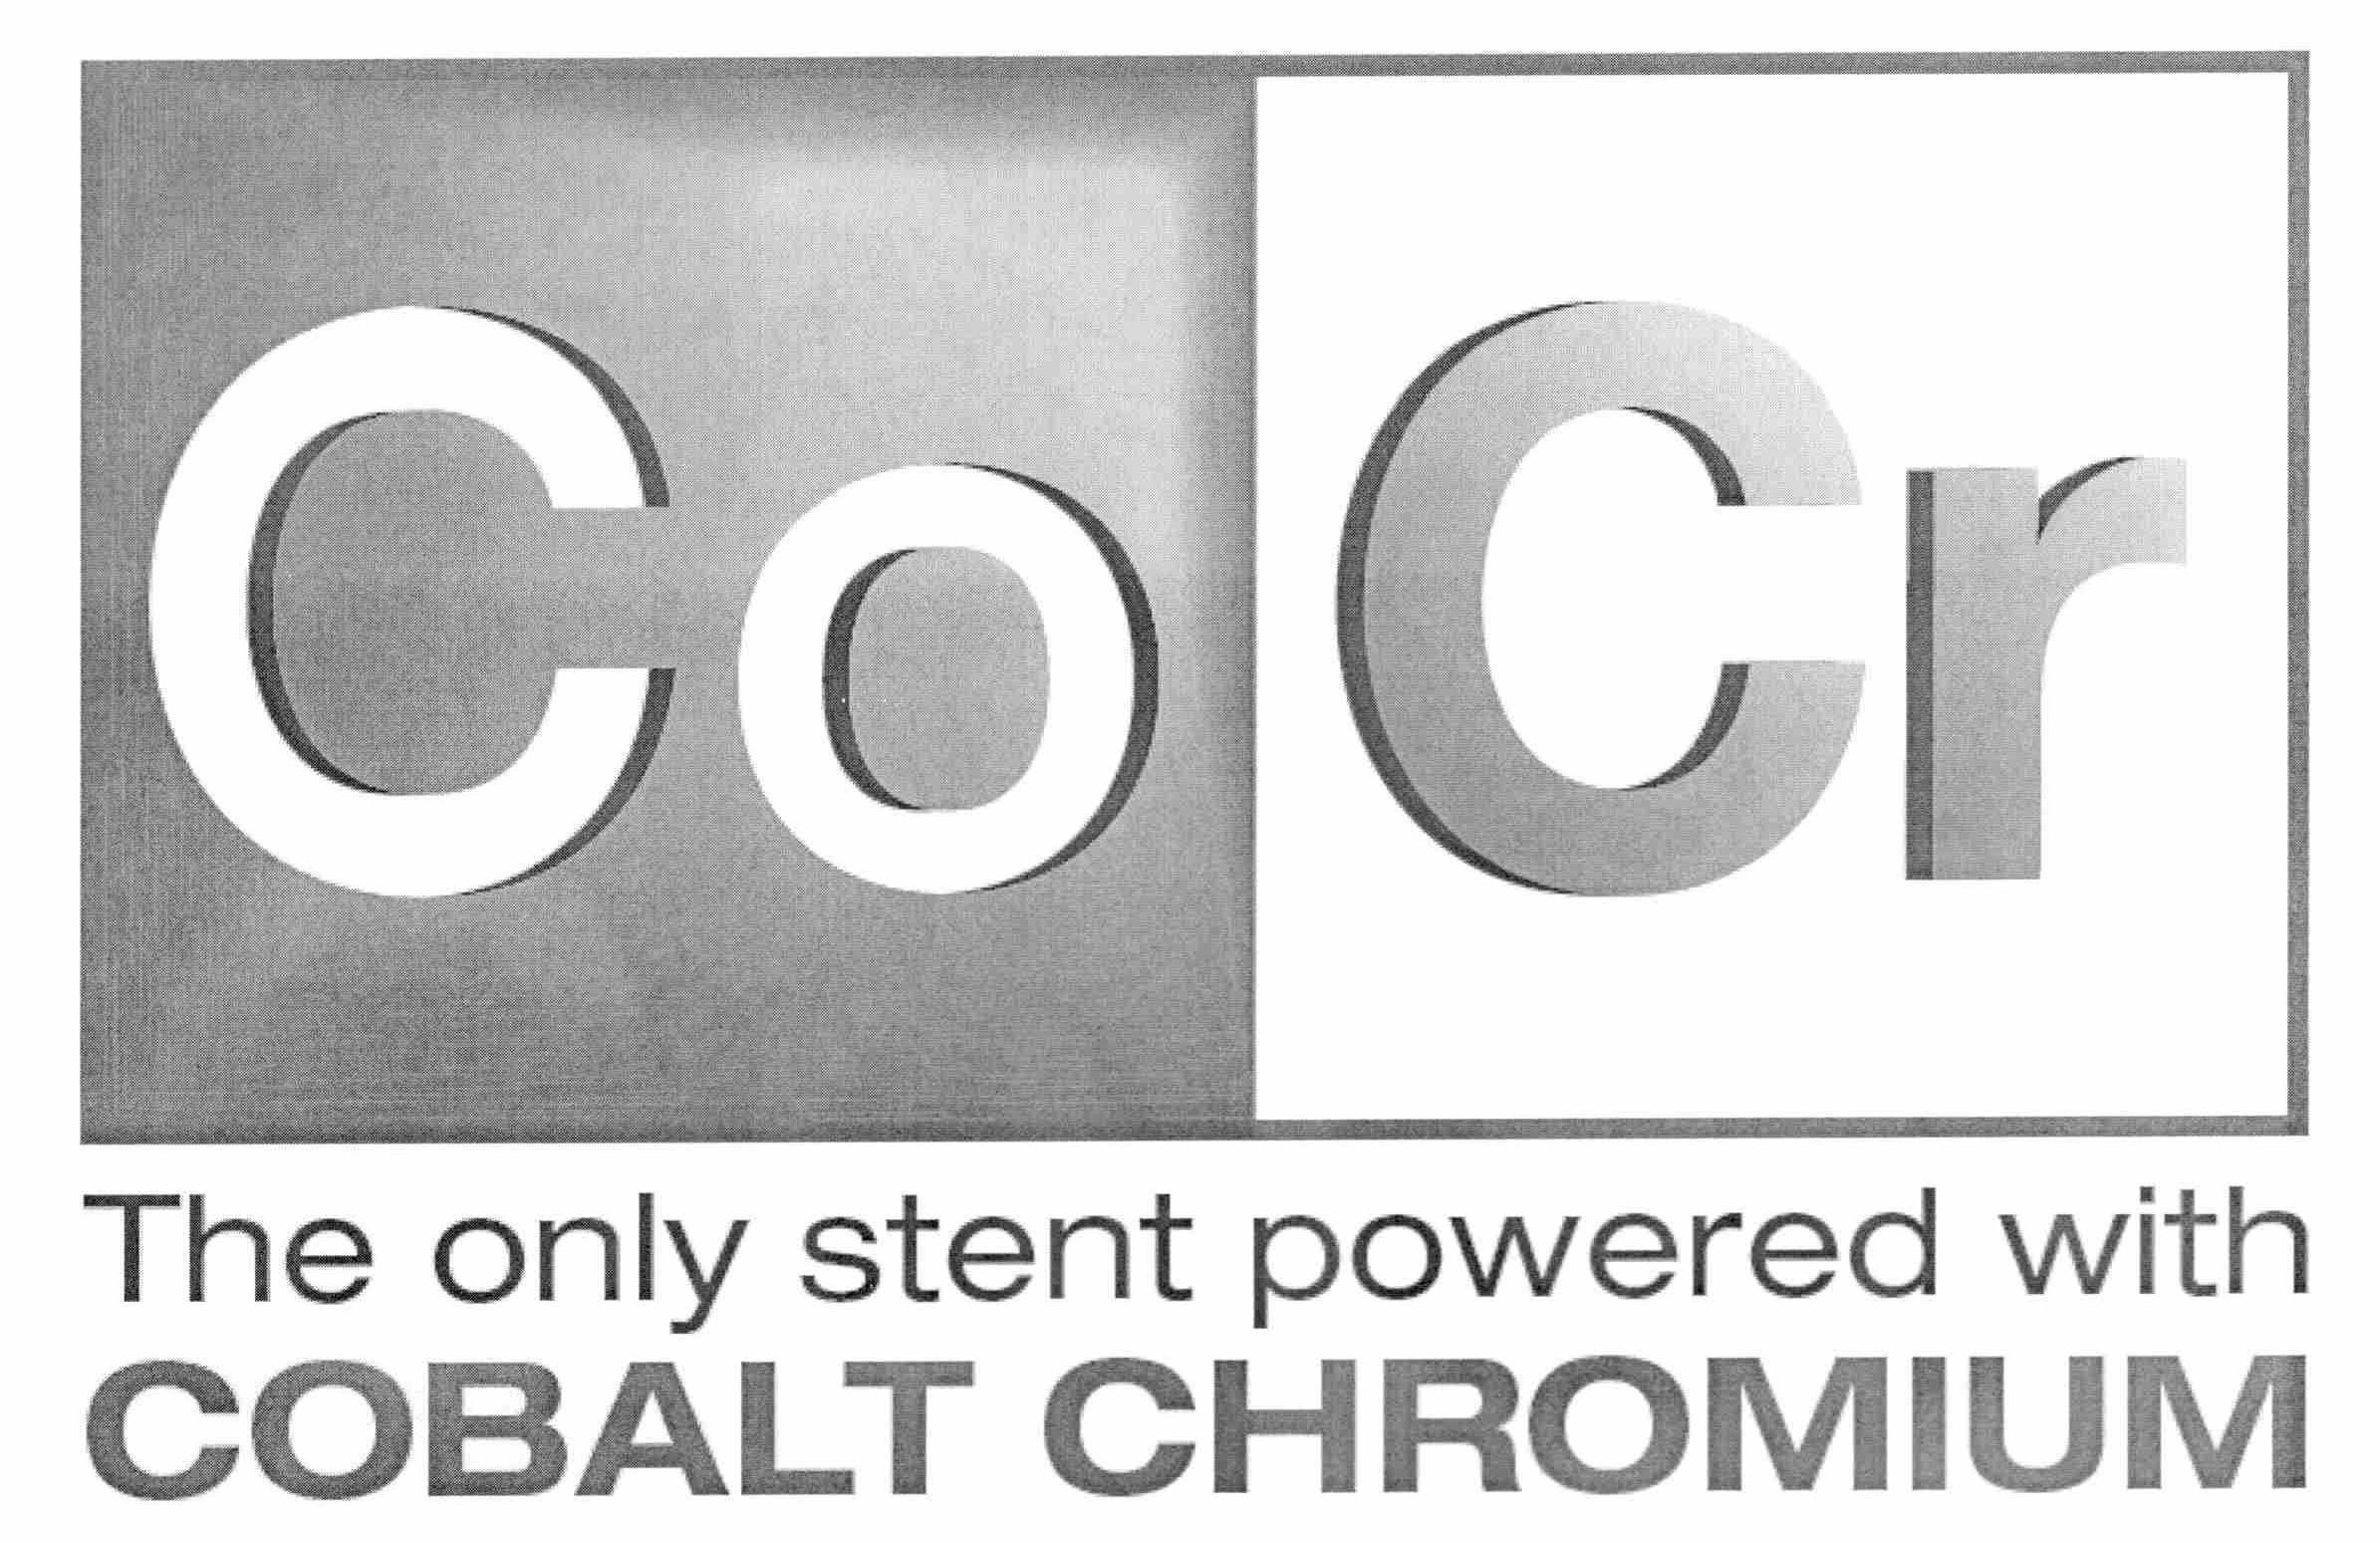  COCR THE ONLY STENT POWERED WITH COBALT CHROMIUM